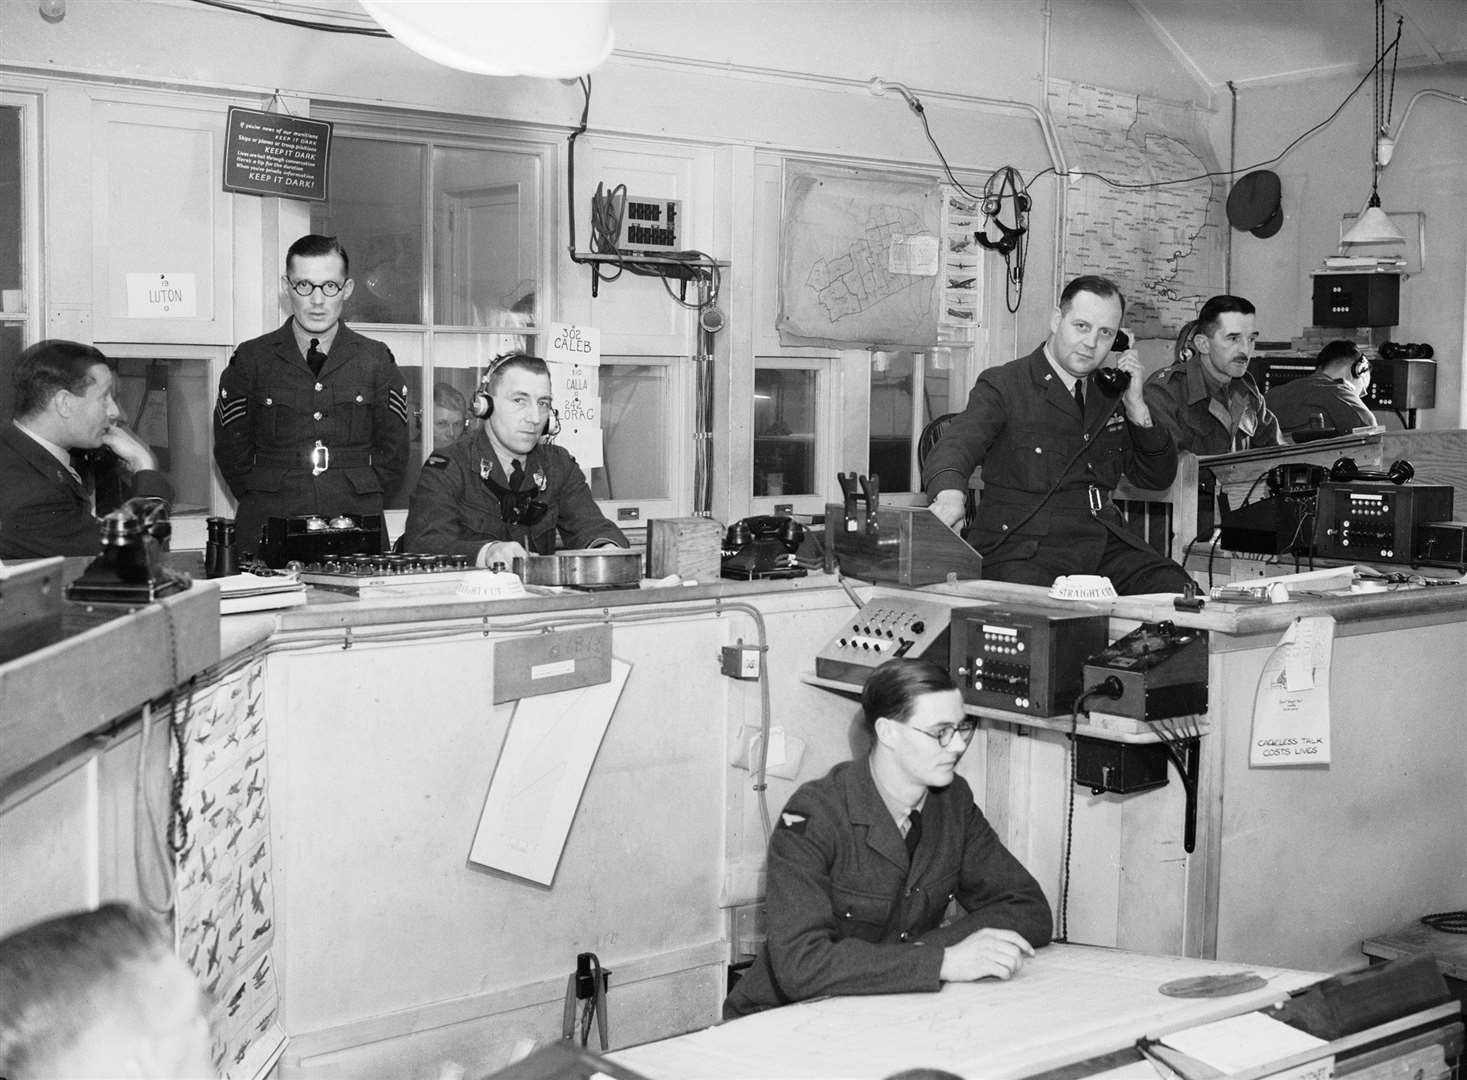 The RAF's defence against enemy raiders was co-ordinated at operations centres like this one